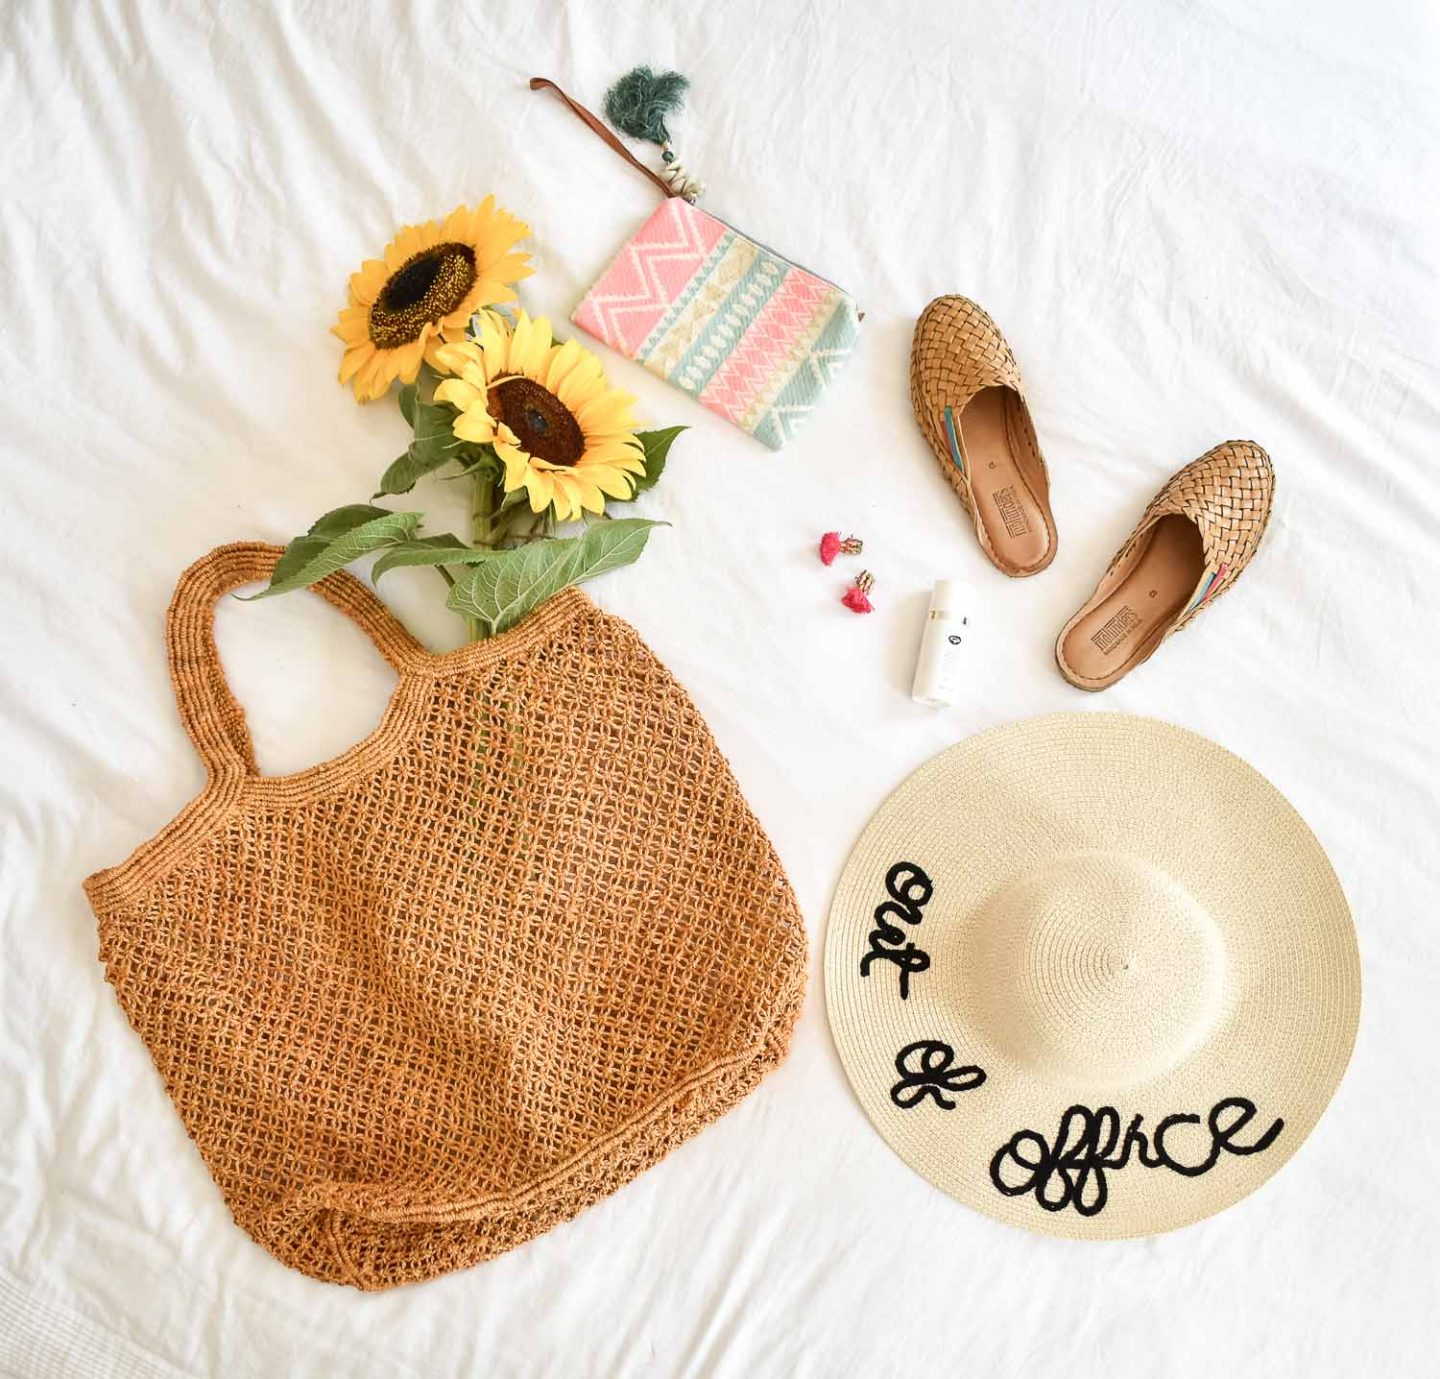 Ethical accessories, a jute bag from The Small Home, tassel earings from Dilli Grey, Mohinder leather shoes and summer hat